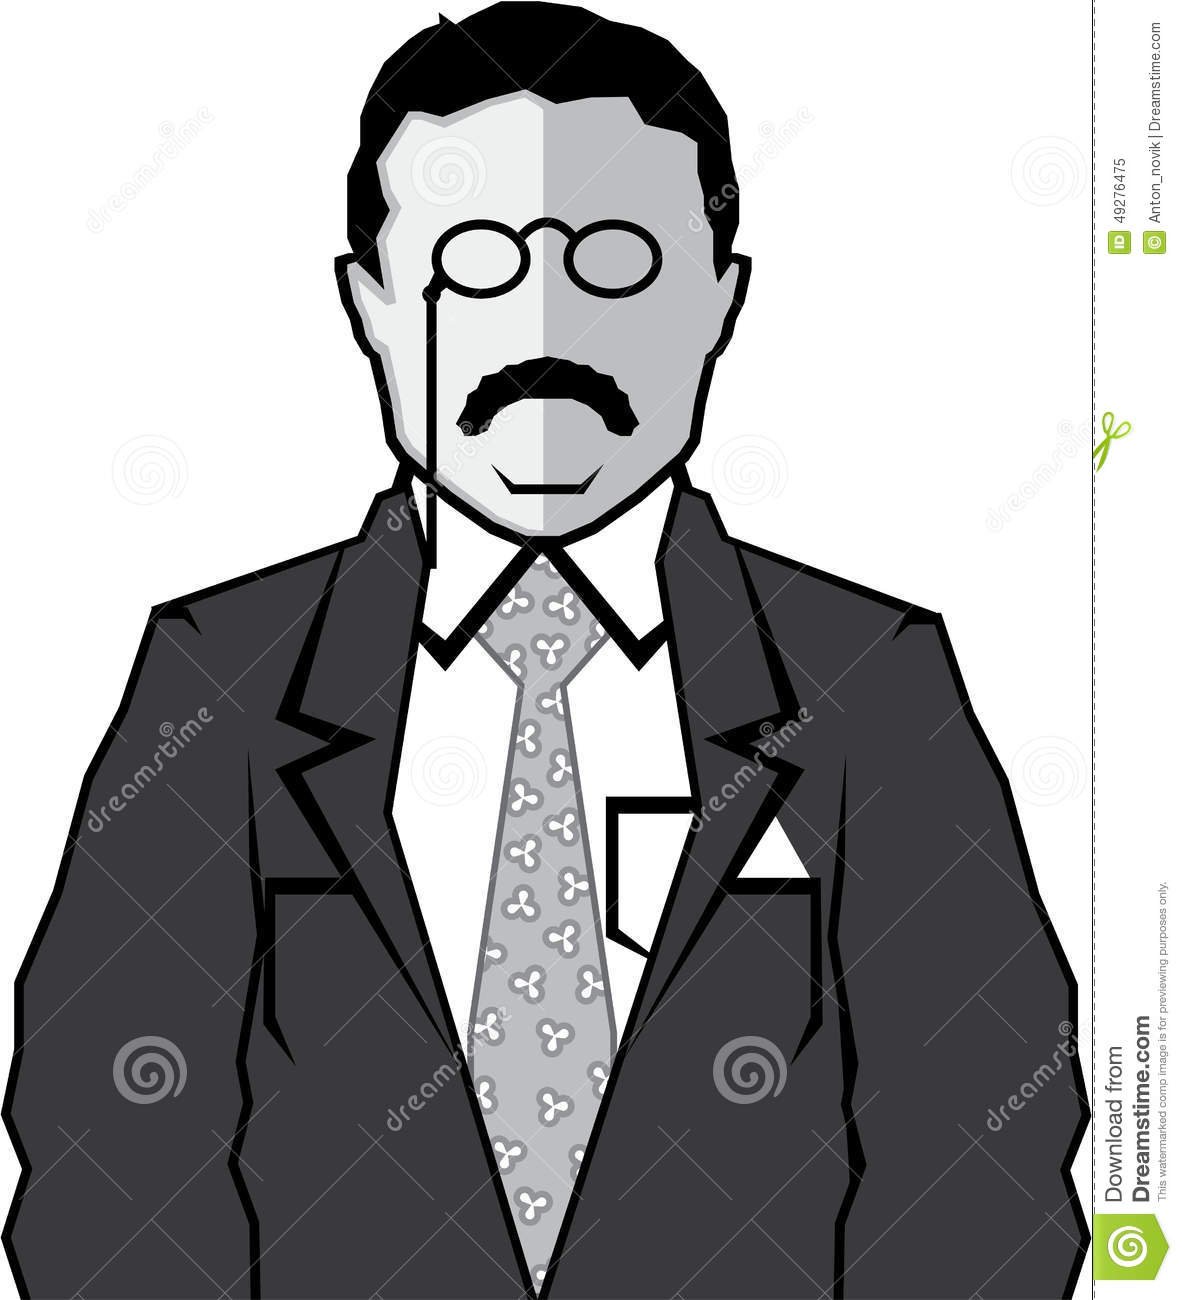 Theodore Roosevelt clipart #14, Download drawings